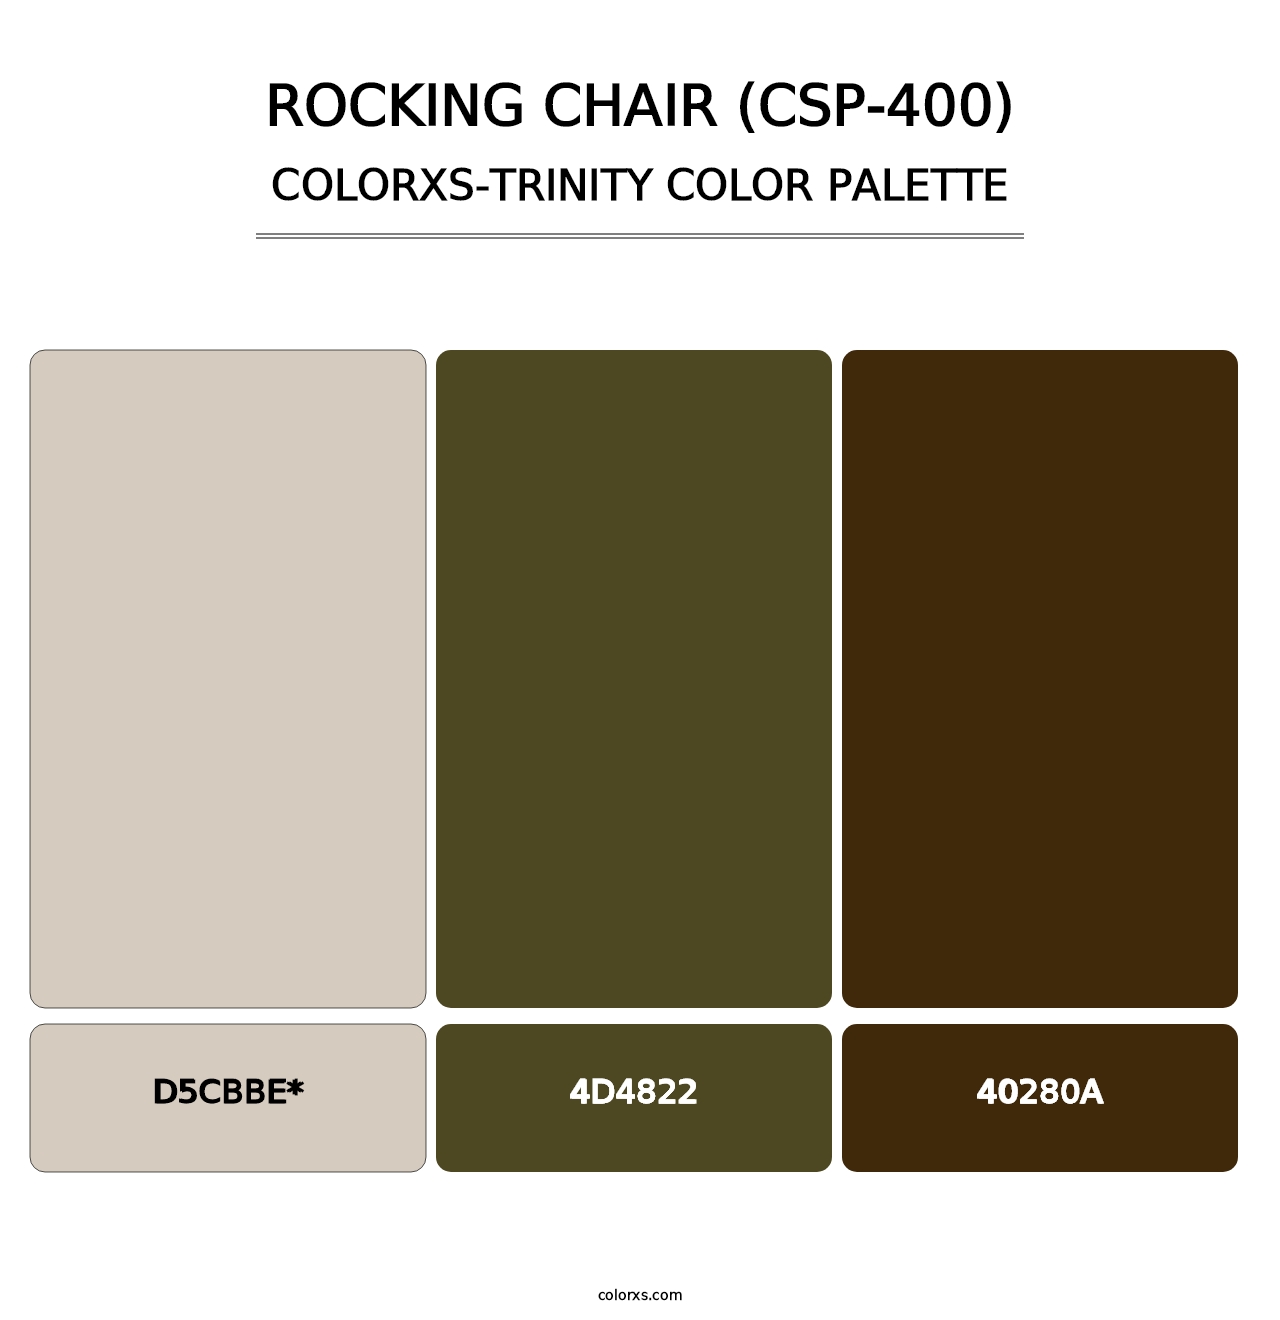 Rocking Chair (CSP-400) - Colorxs Trinity Palette